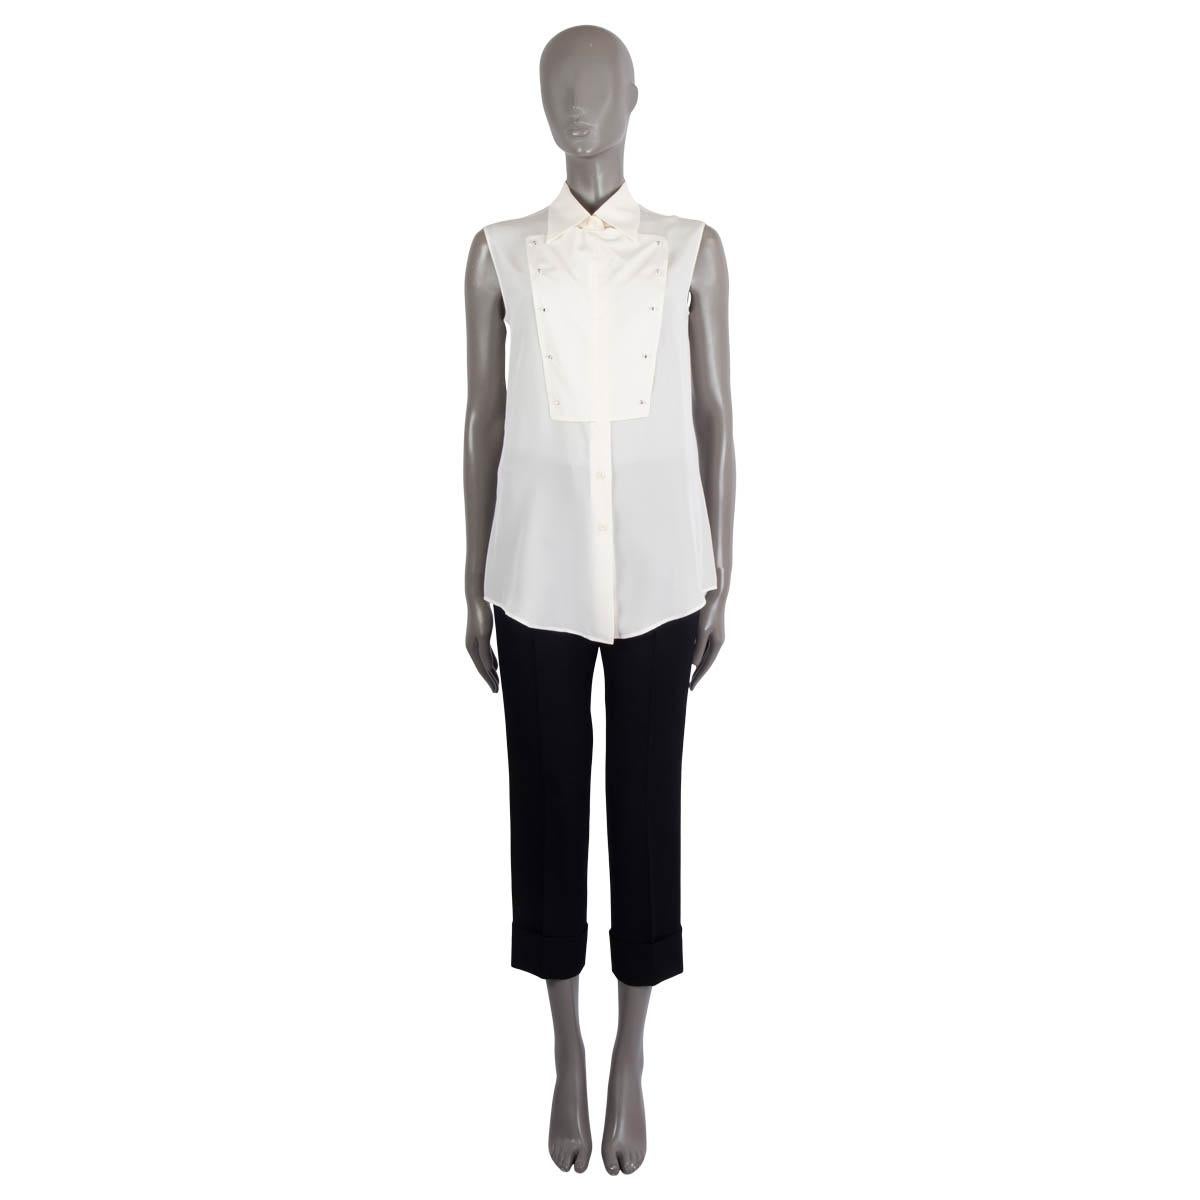 100% authentic Prada 2016 bib front sleeveless crepe silk (100%) (missing tag) shirt in ivory. Has been worn and is in excellent condition. 

Measurements
Tag Size	Missing
Size	S
Shoulder Width	37cm (14.4in)
Bust From	94cm (36.7in)
Waist From	92cm